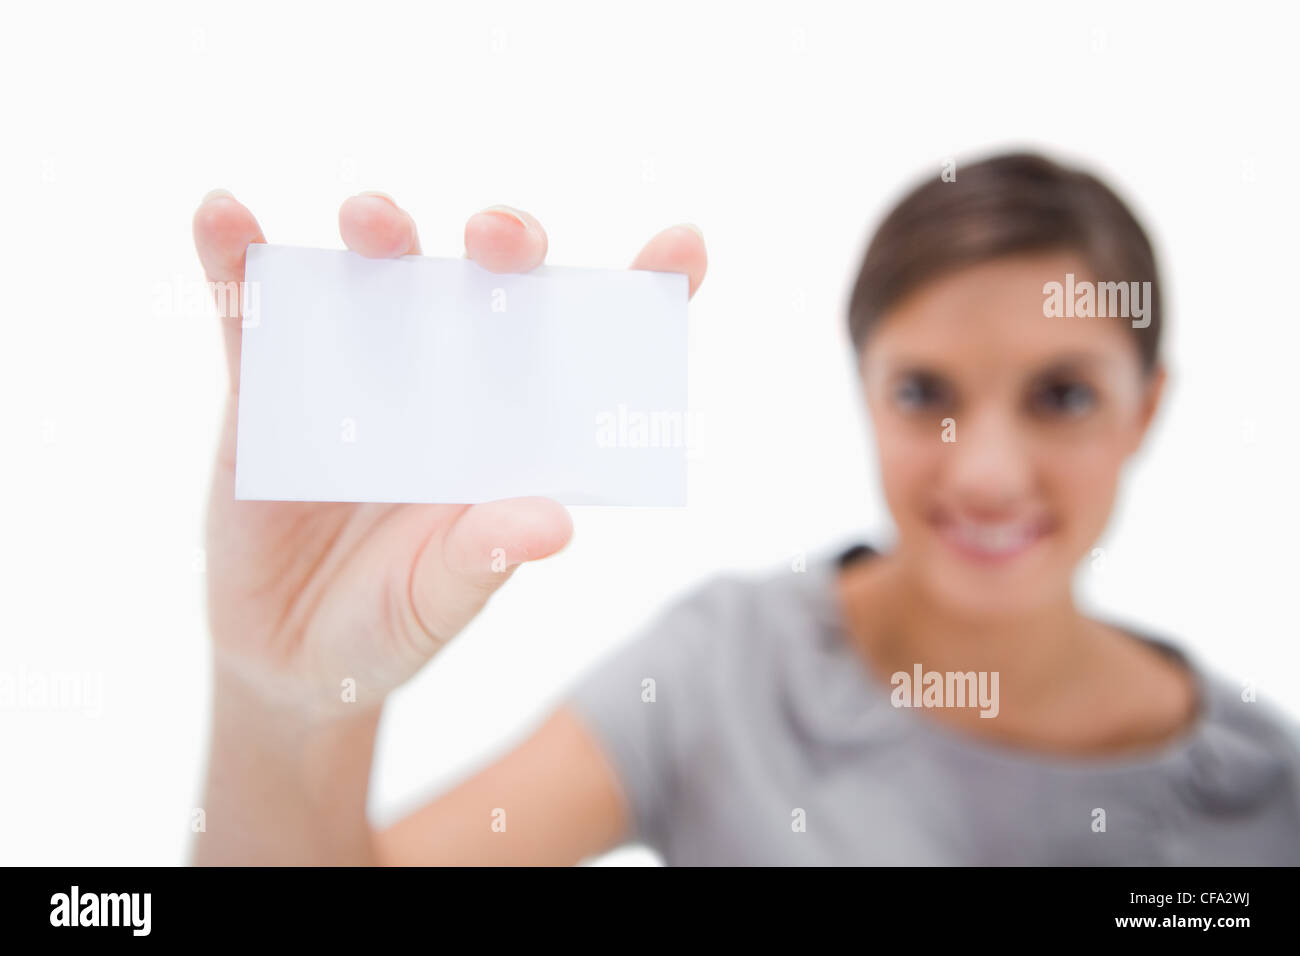 Blank business card being presented by smiling woman Stock Photo